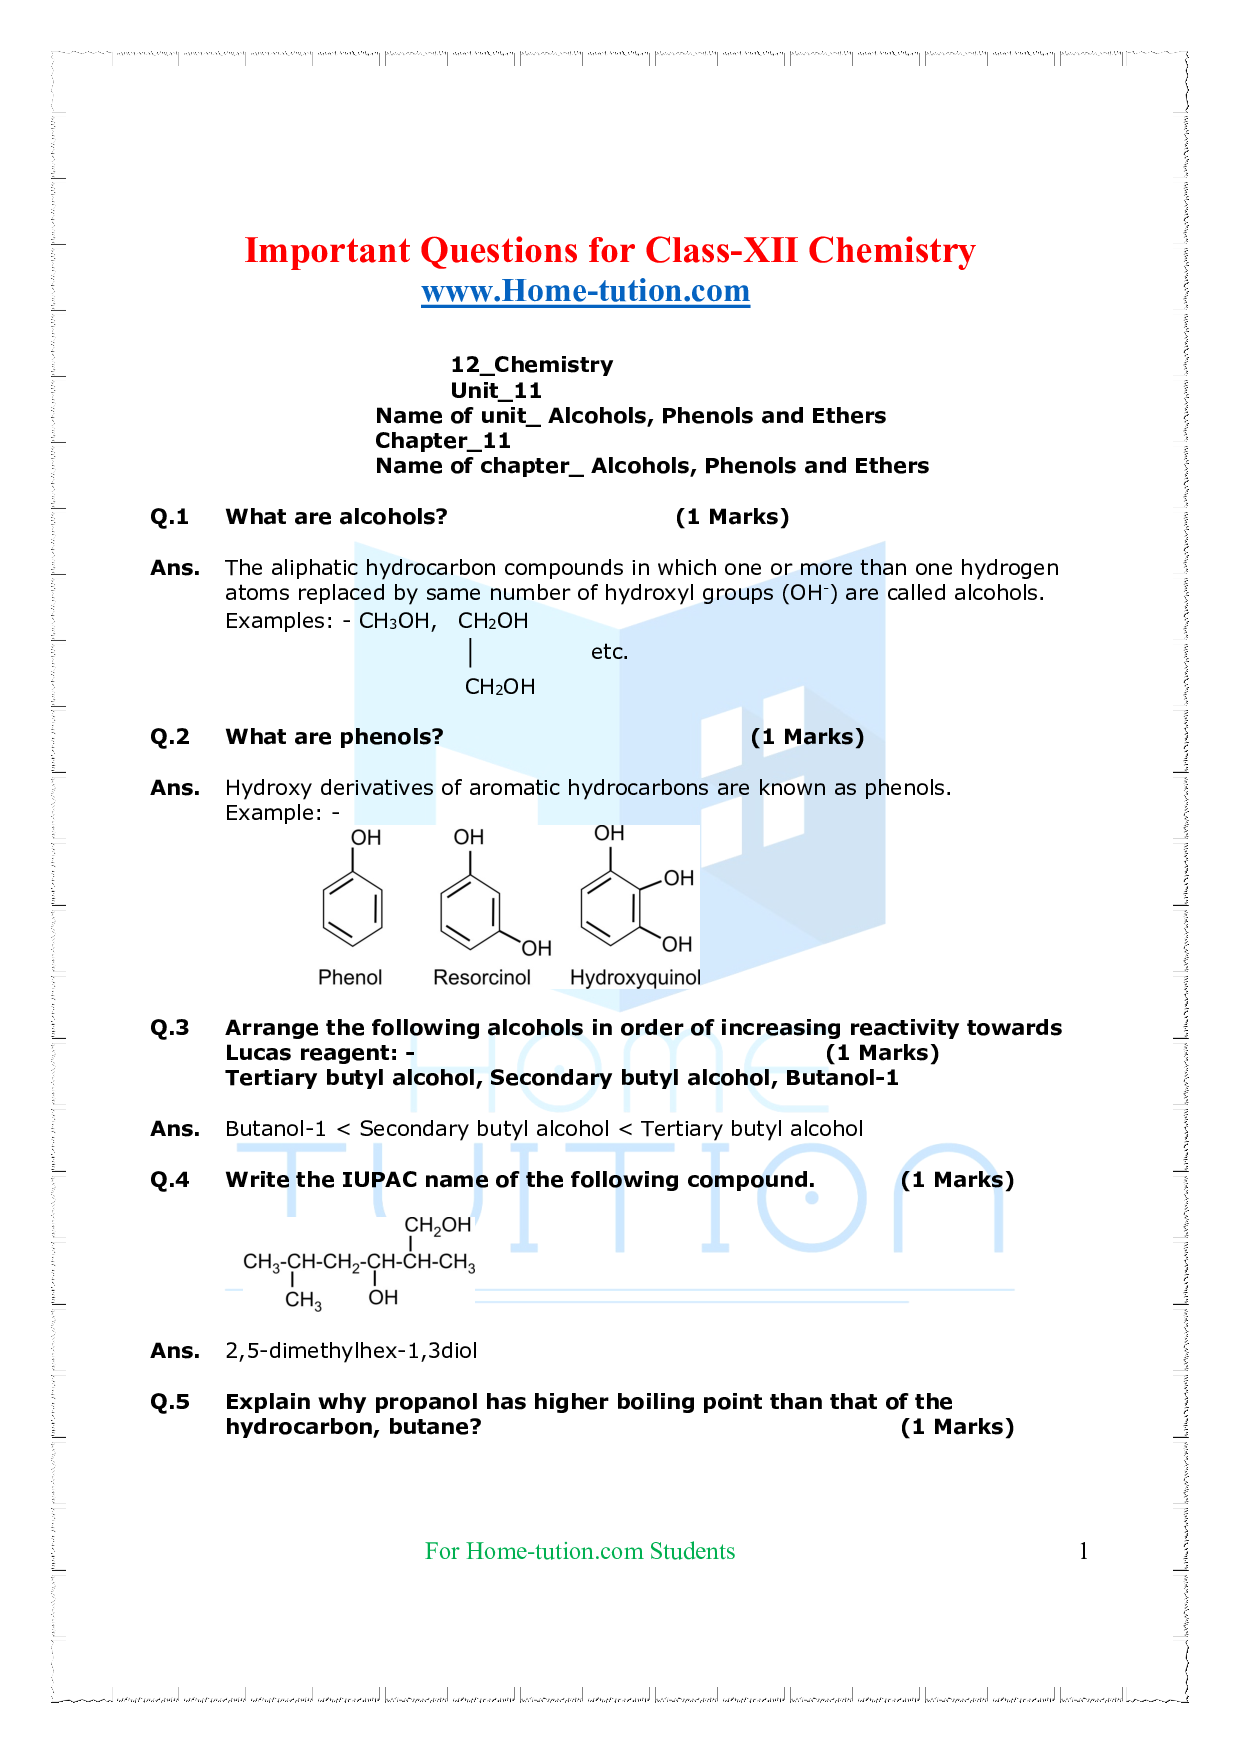 case study questions class 12 chemistry alcohols phenols and ethers